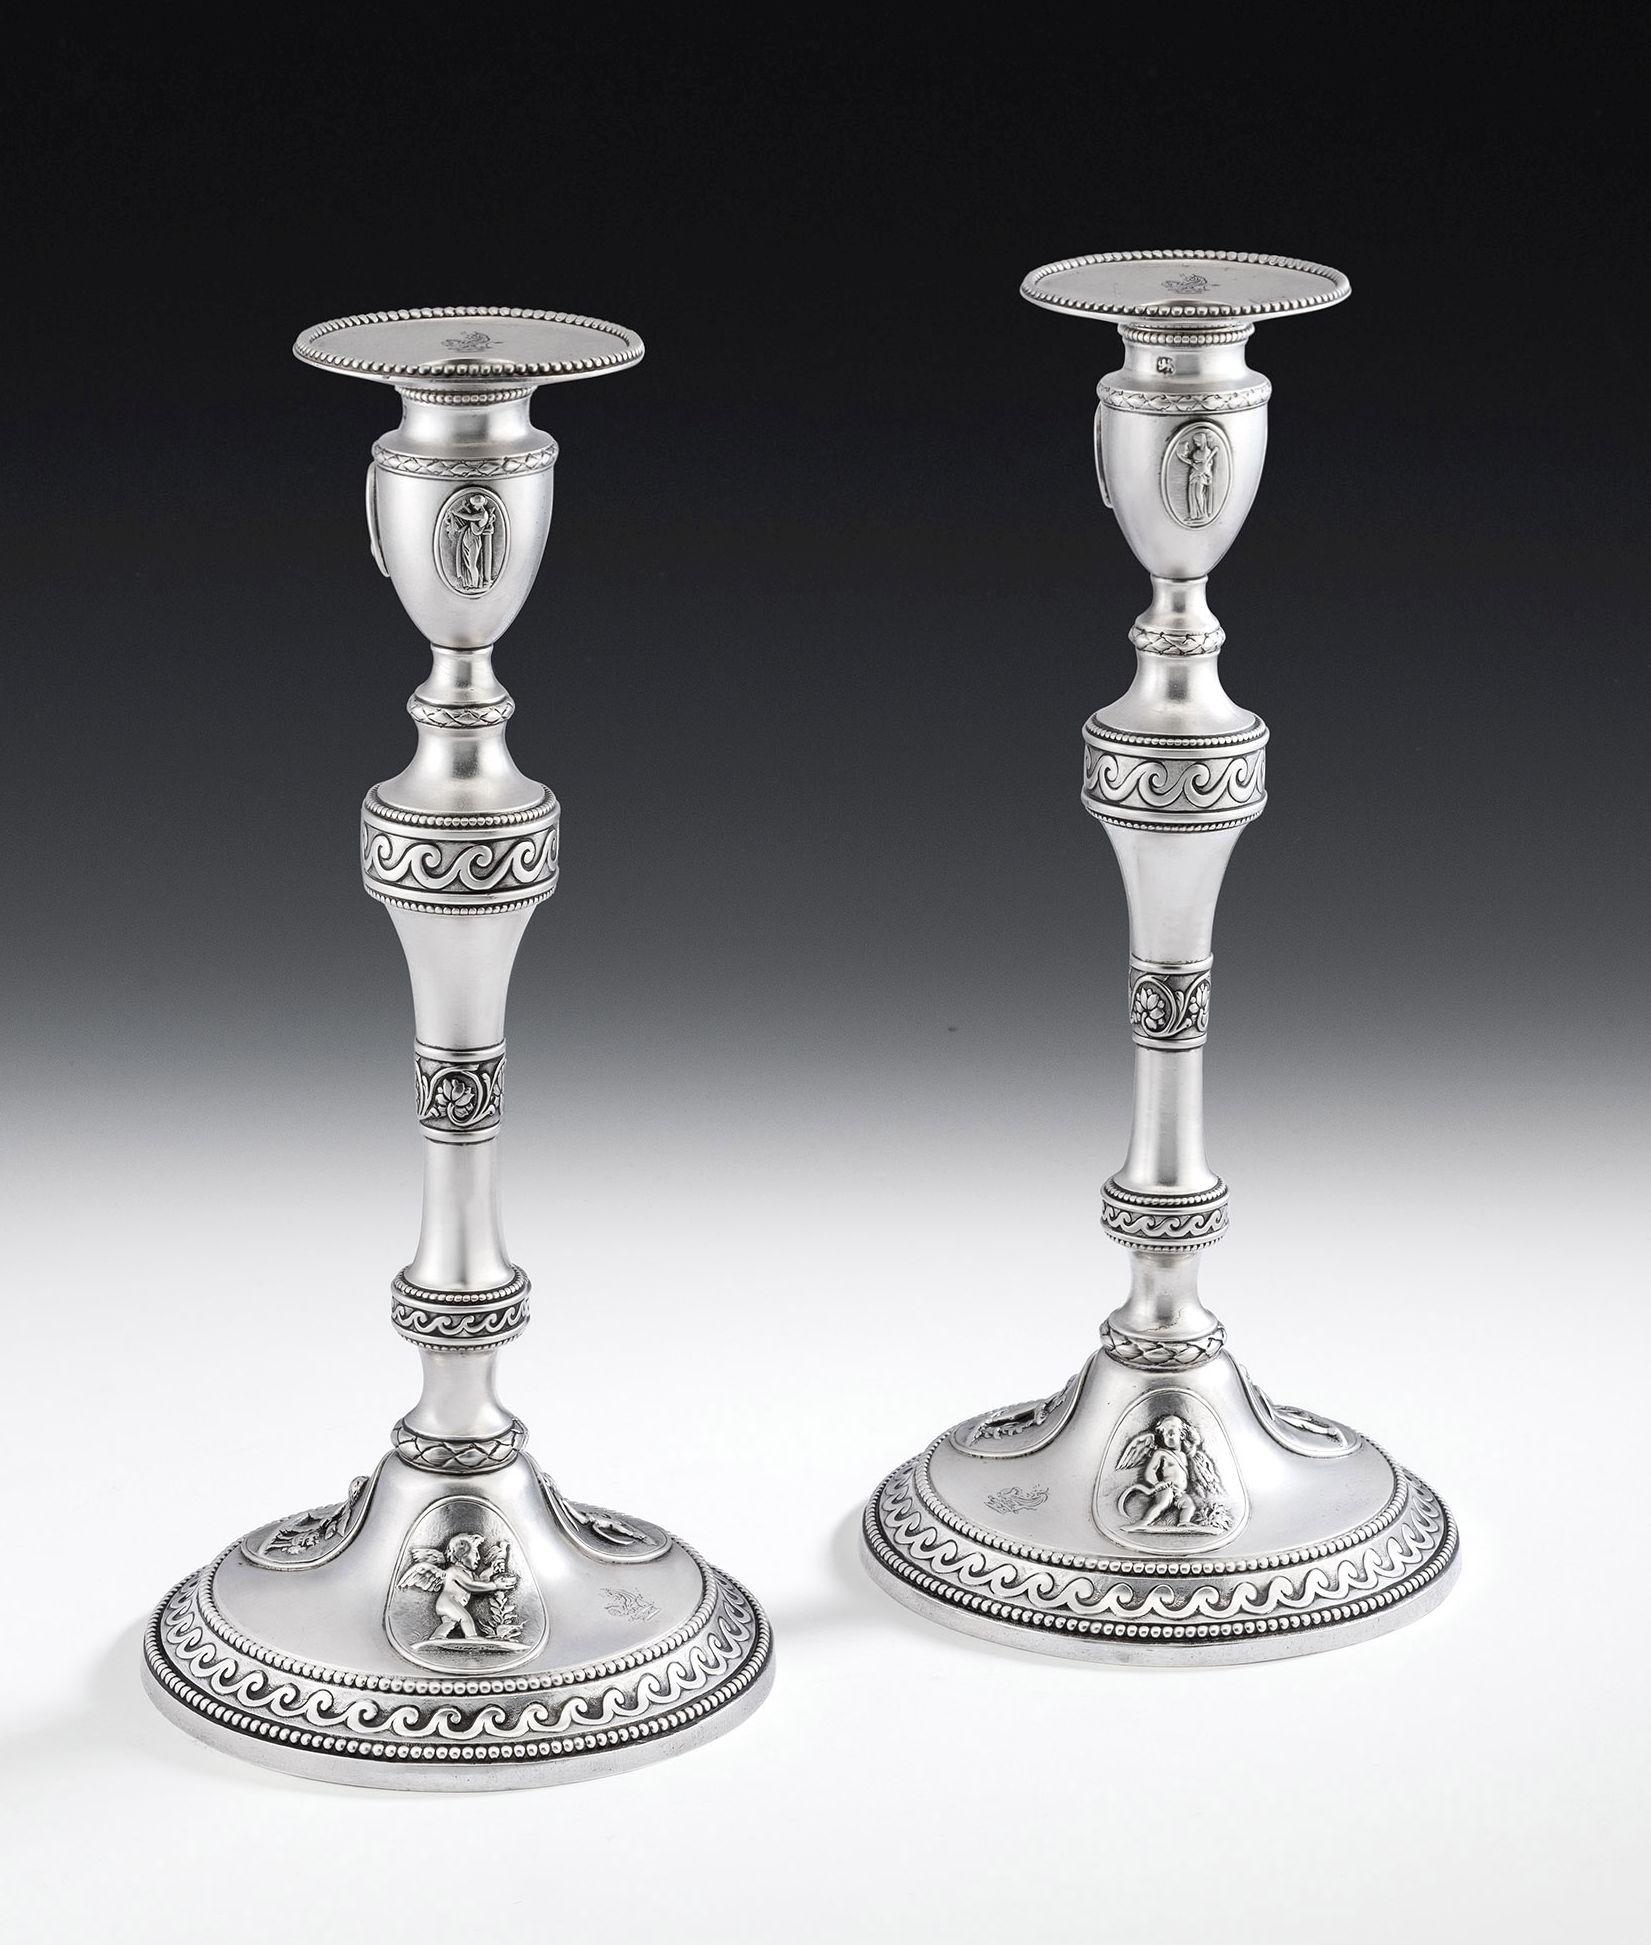 These exceptionally rare cast candlesticks have a circular base, with a double beaded edge, enclosing a band of wave motifs on a matted ground. Most unusually the base is decorated with raised cast classical medallions depicting Cupid with the